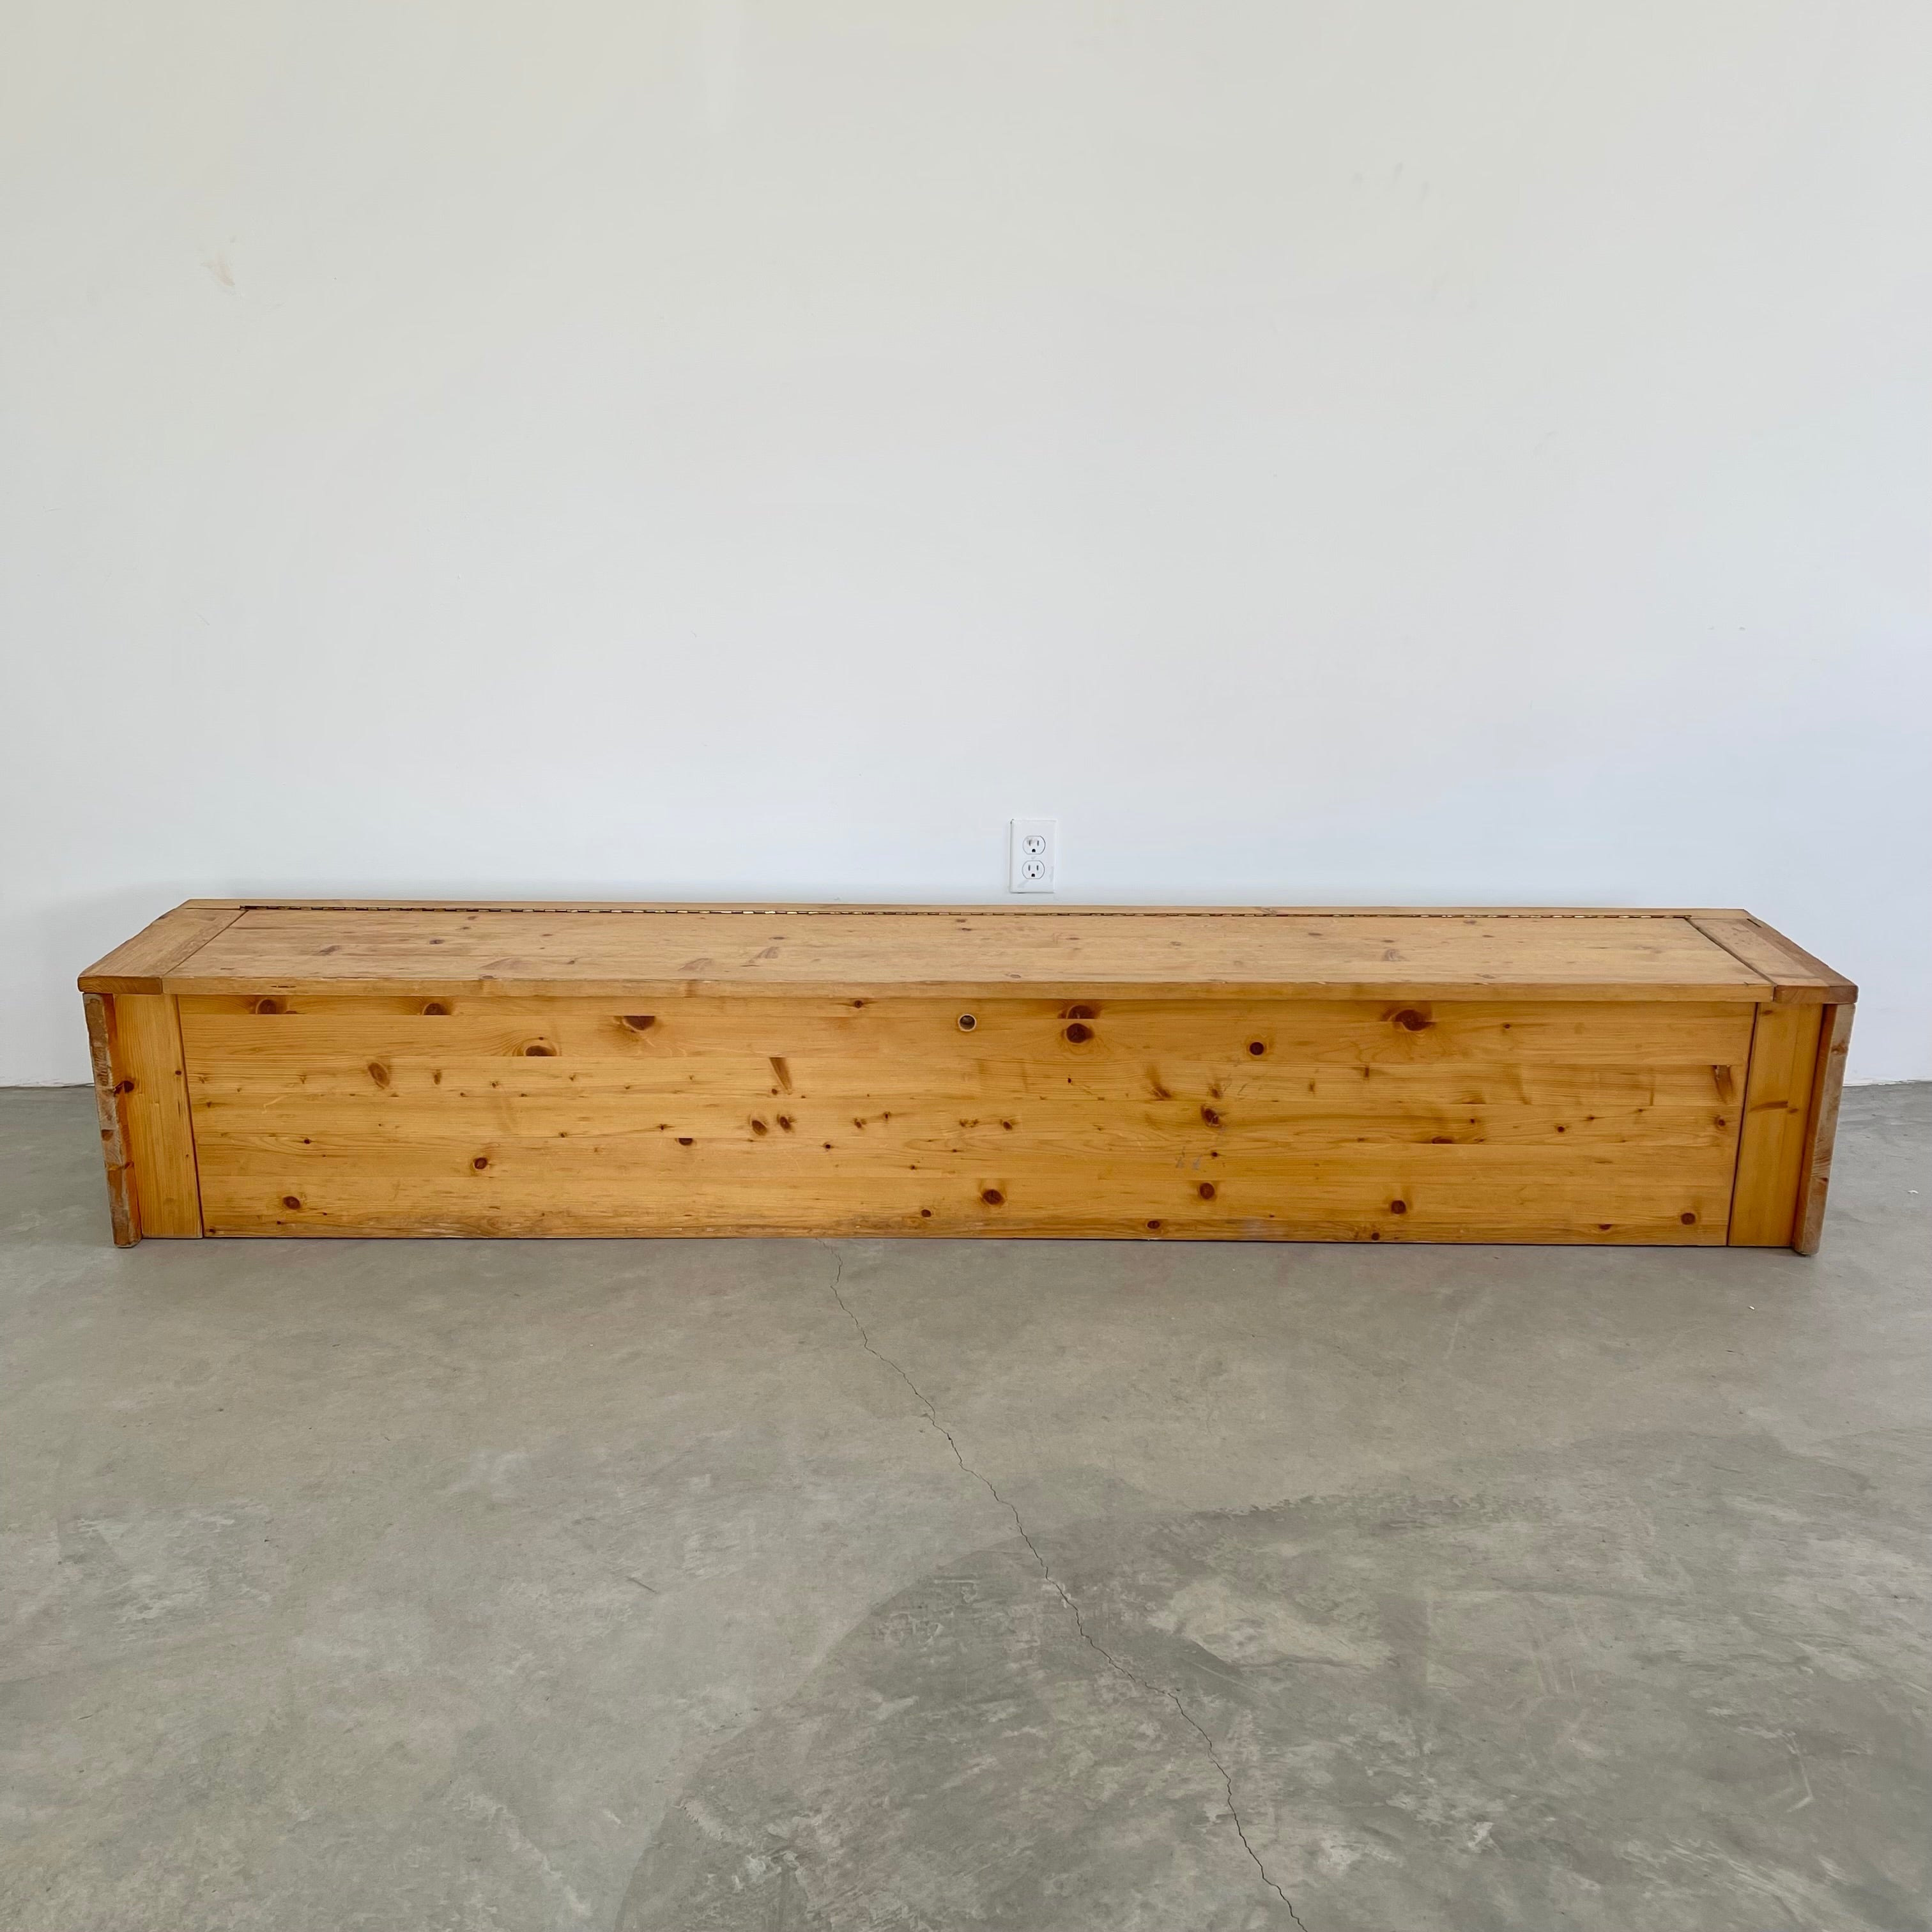 Charlotte Perriand, 'Les Arcs' Bench — Ruby Atelier